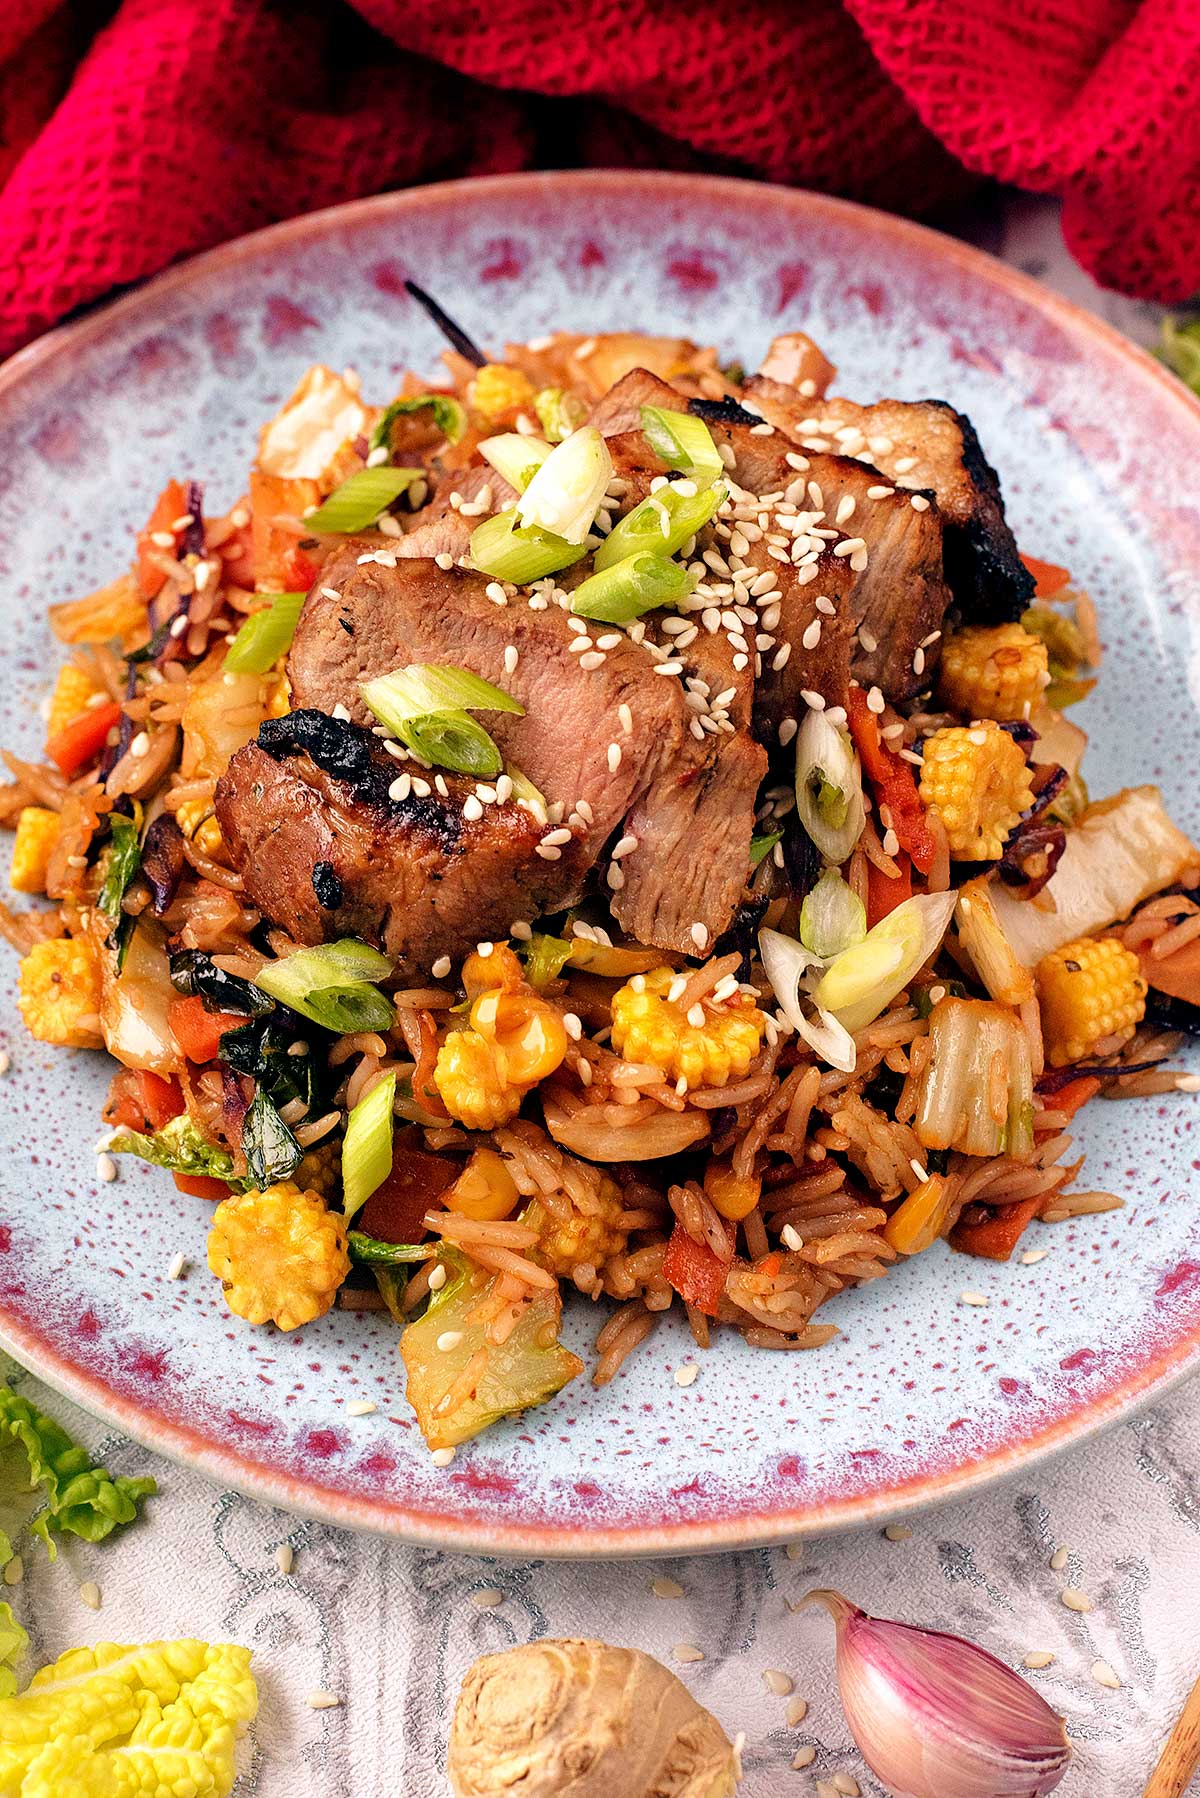 A stir fry dish made with vegetables and pork, on a round blue plate.